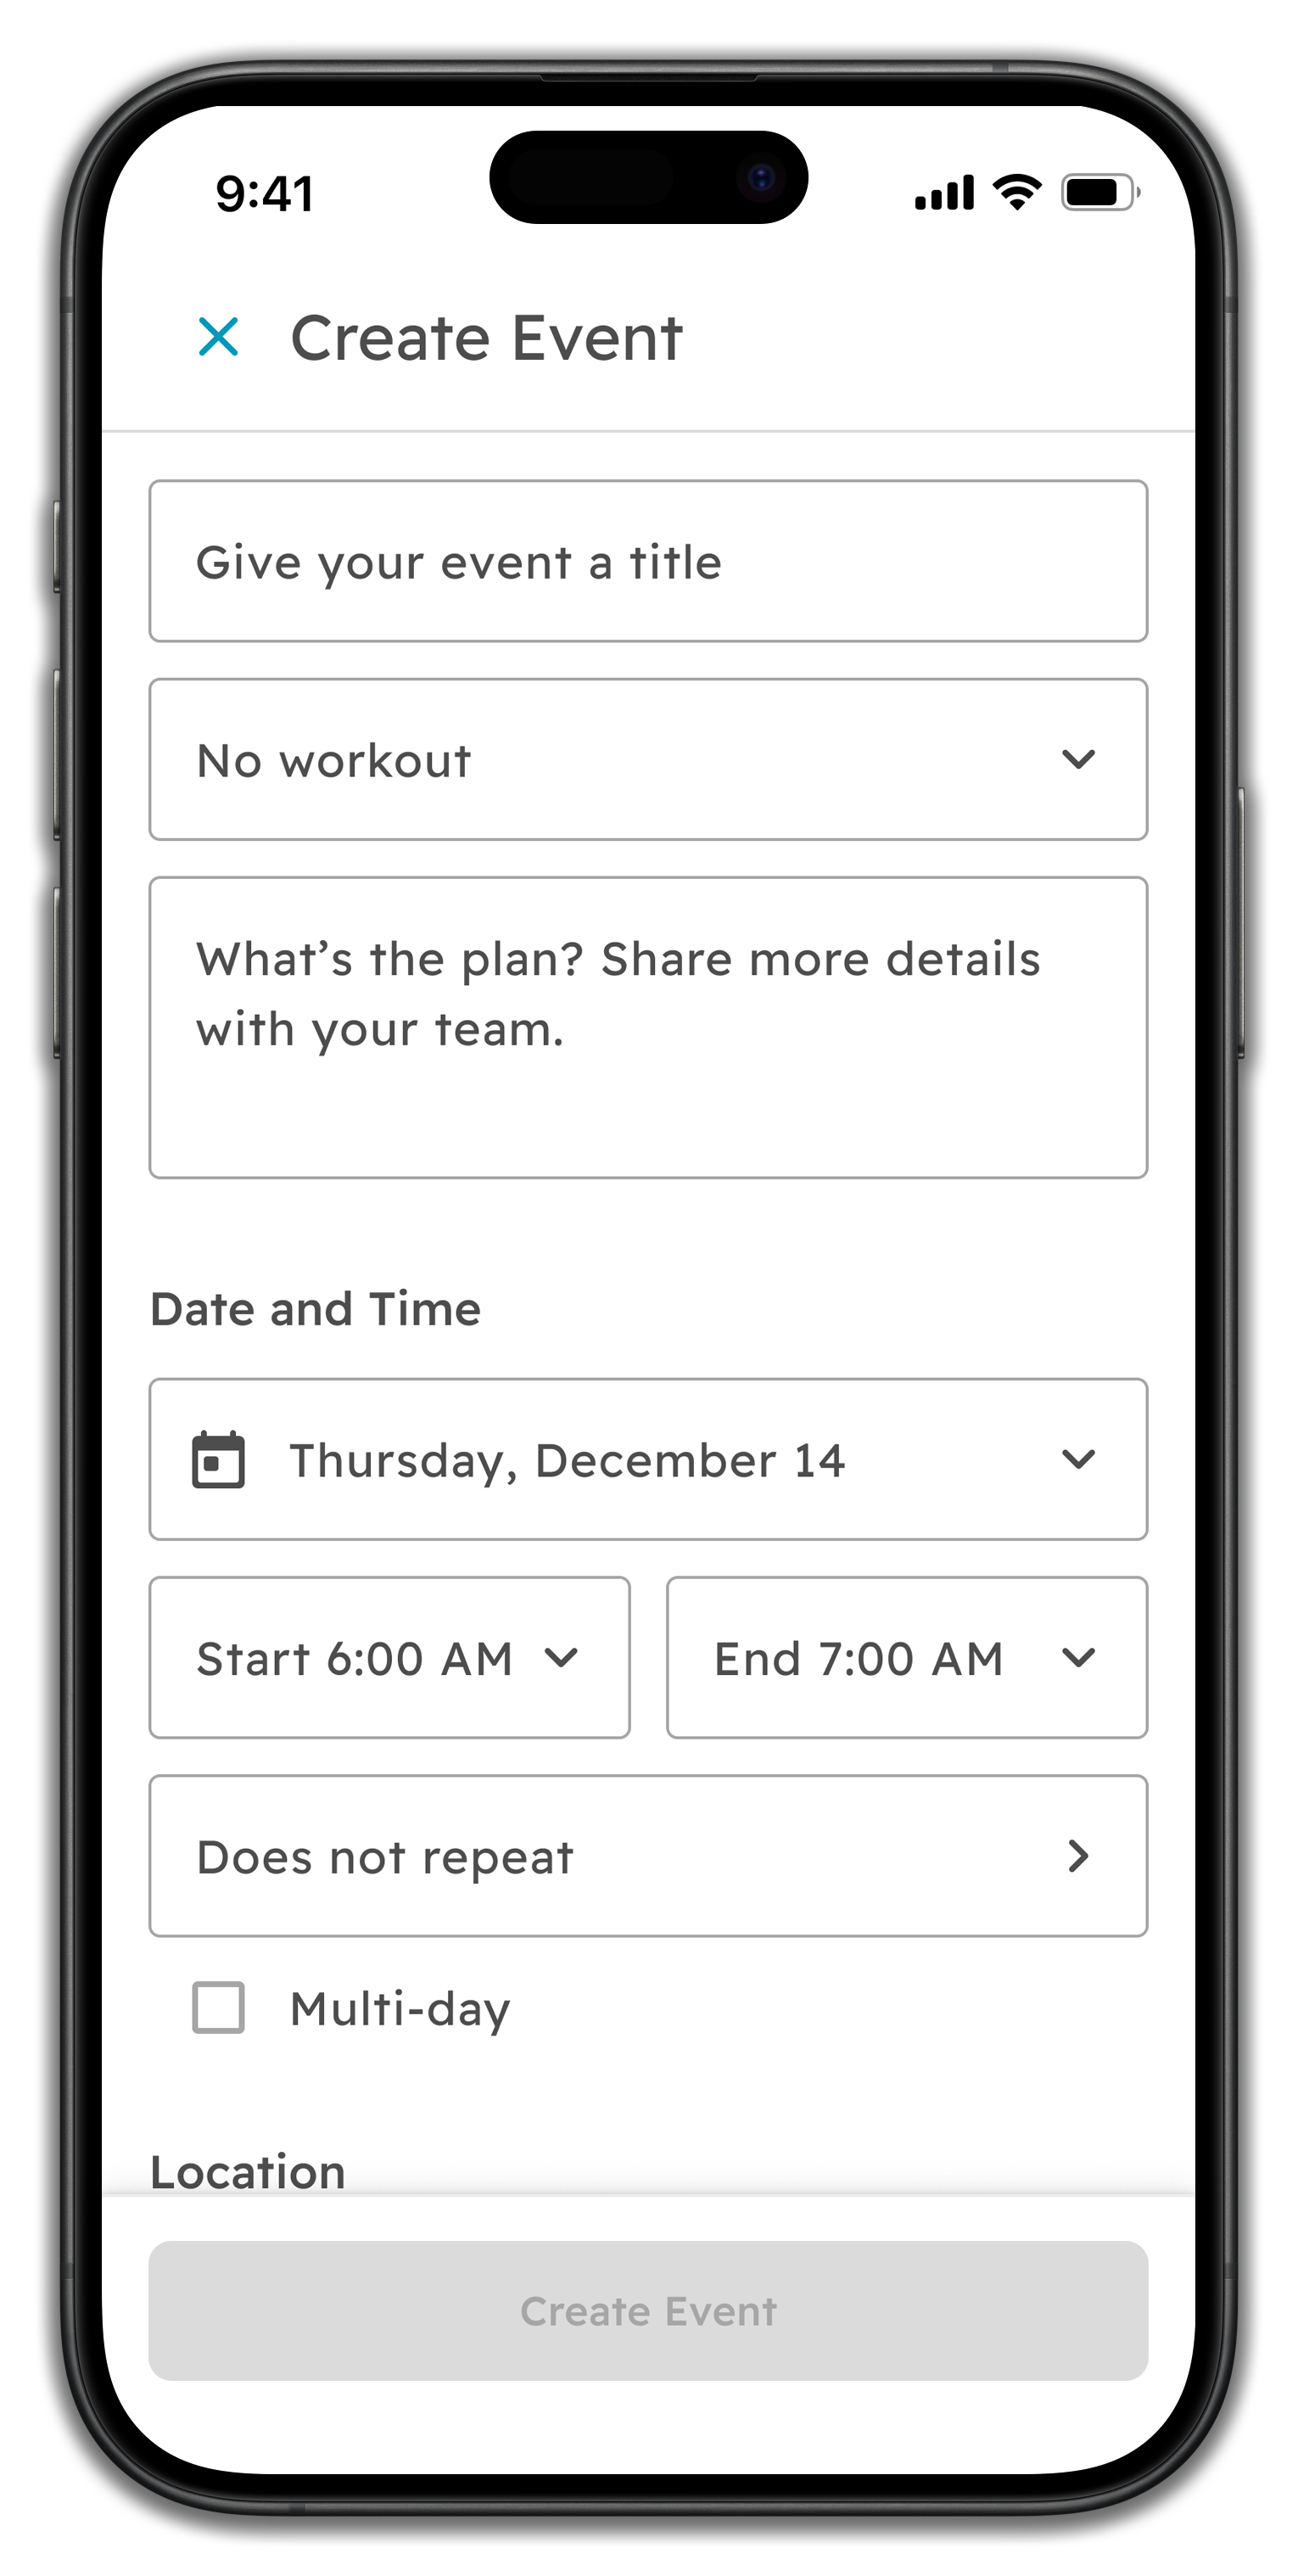 Sample mobile screen with the activity feed on, this includes a profile photo, name, location and erg screen image with information about the workout. 